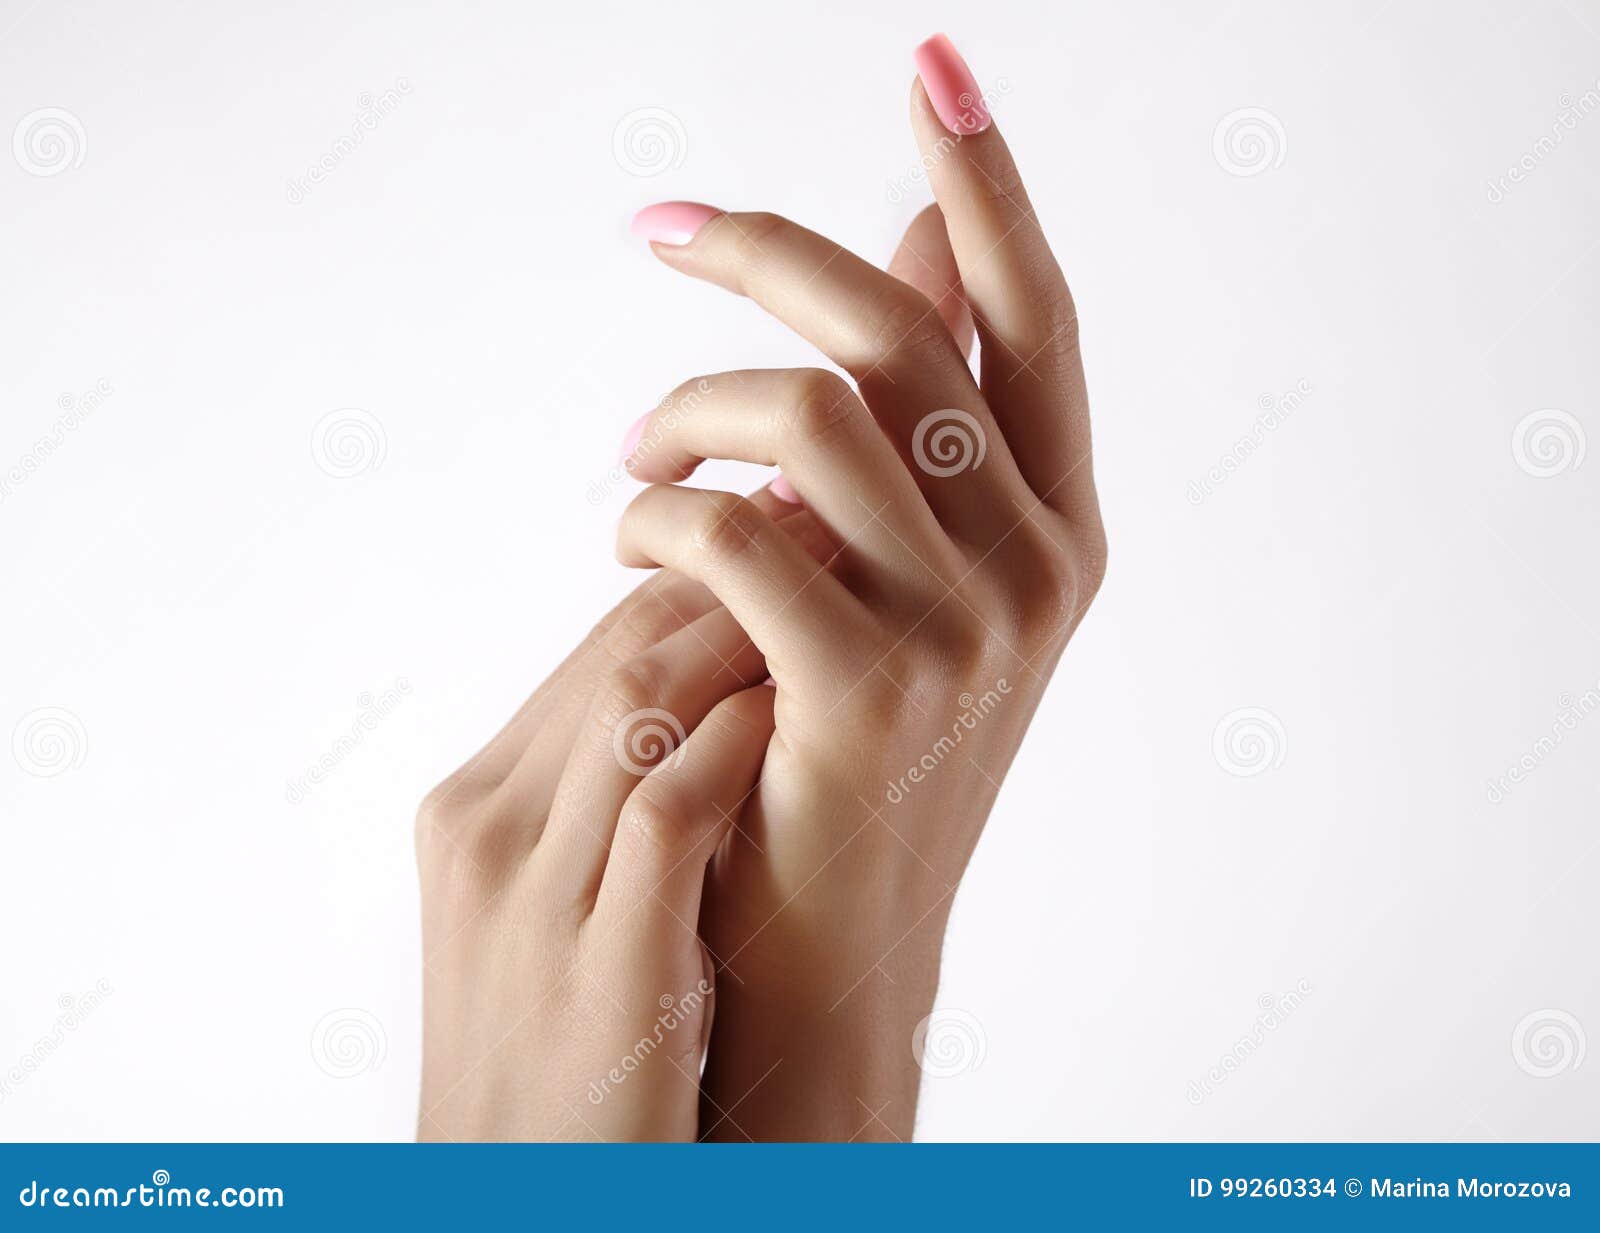 beautiful woman`s hands on light background. care about hand. tender palm. natural manicure, clean skin. pink nails